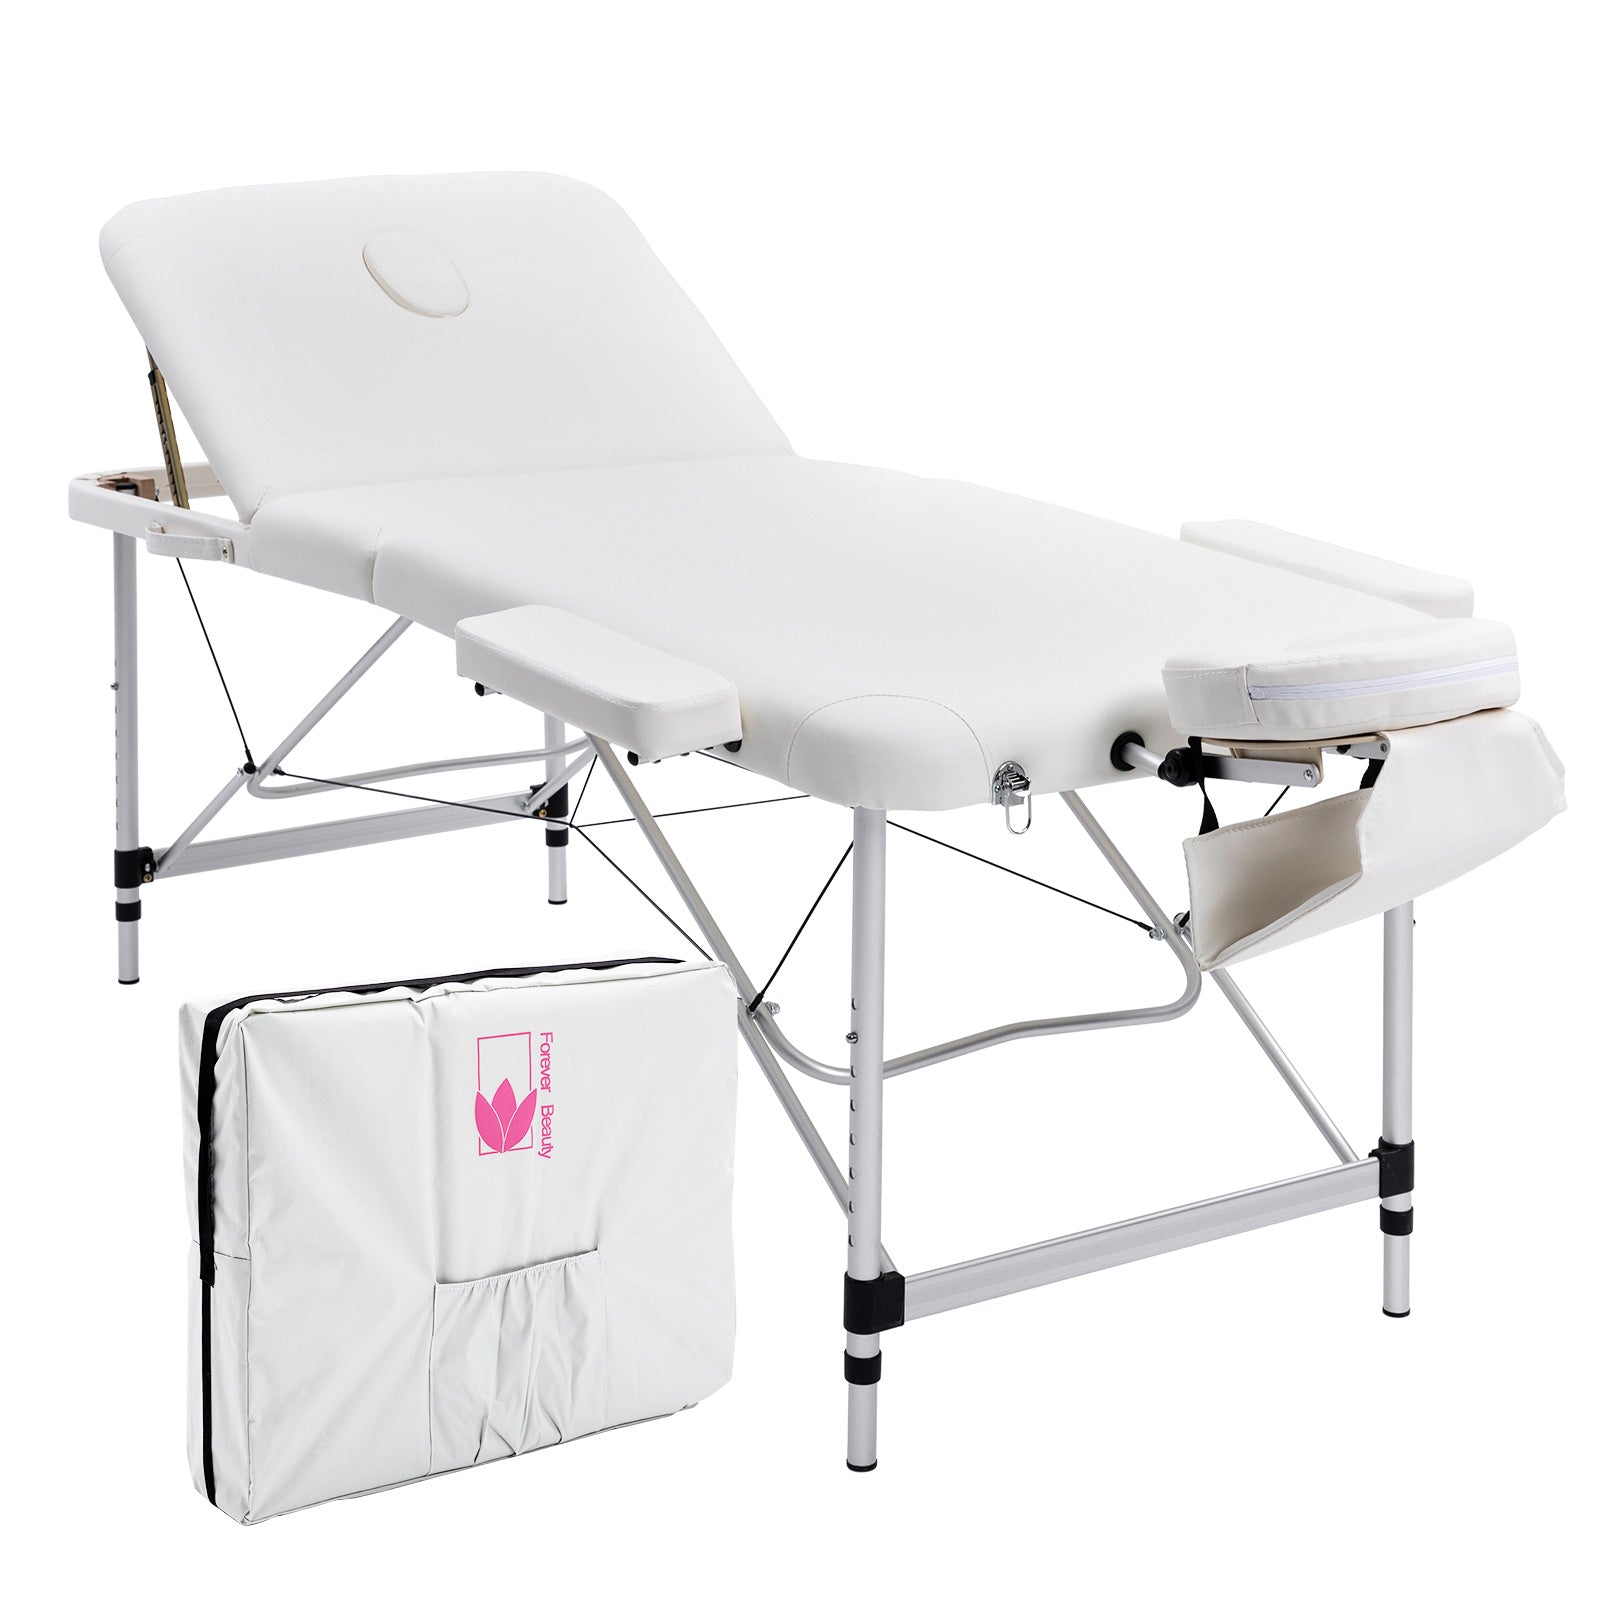 White Portable Beauty Massage Table Bed Therapy Waxing 3 Fold 75cm Aluminium - image1